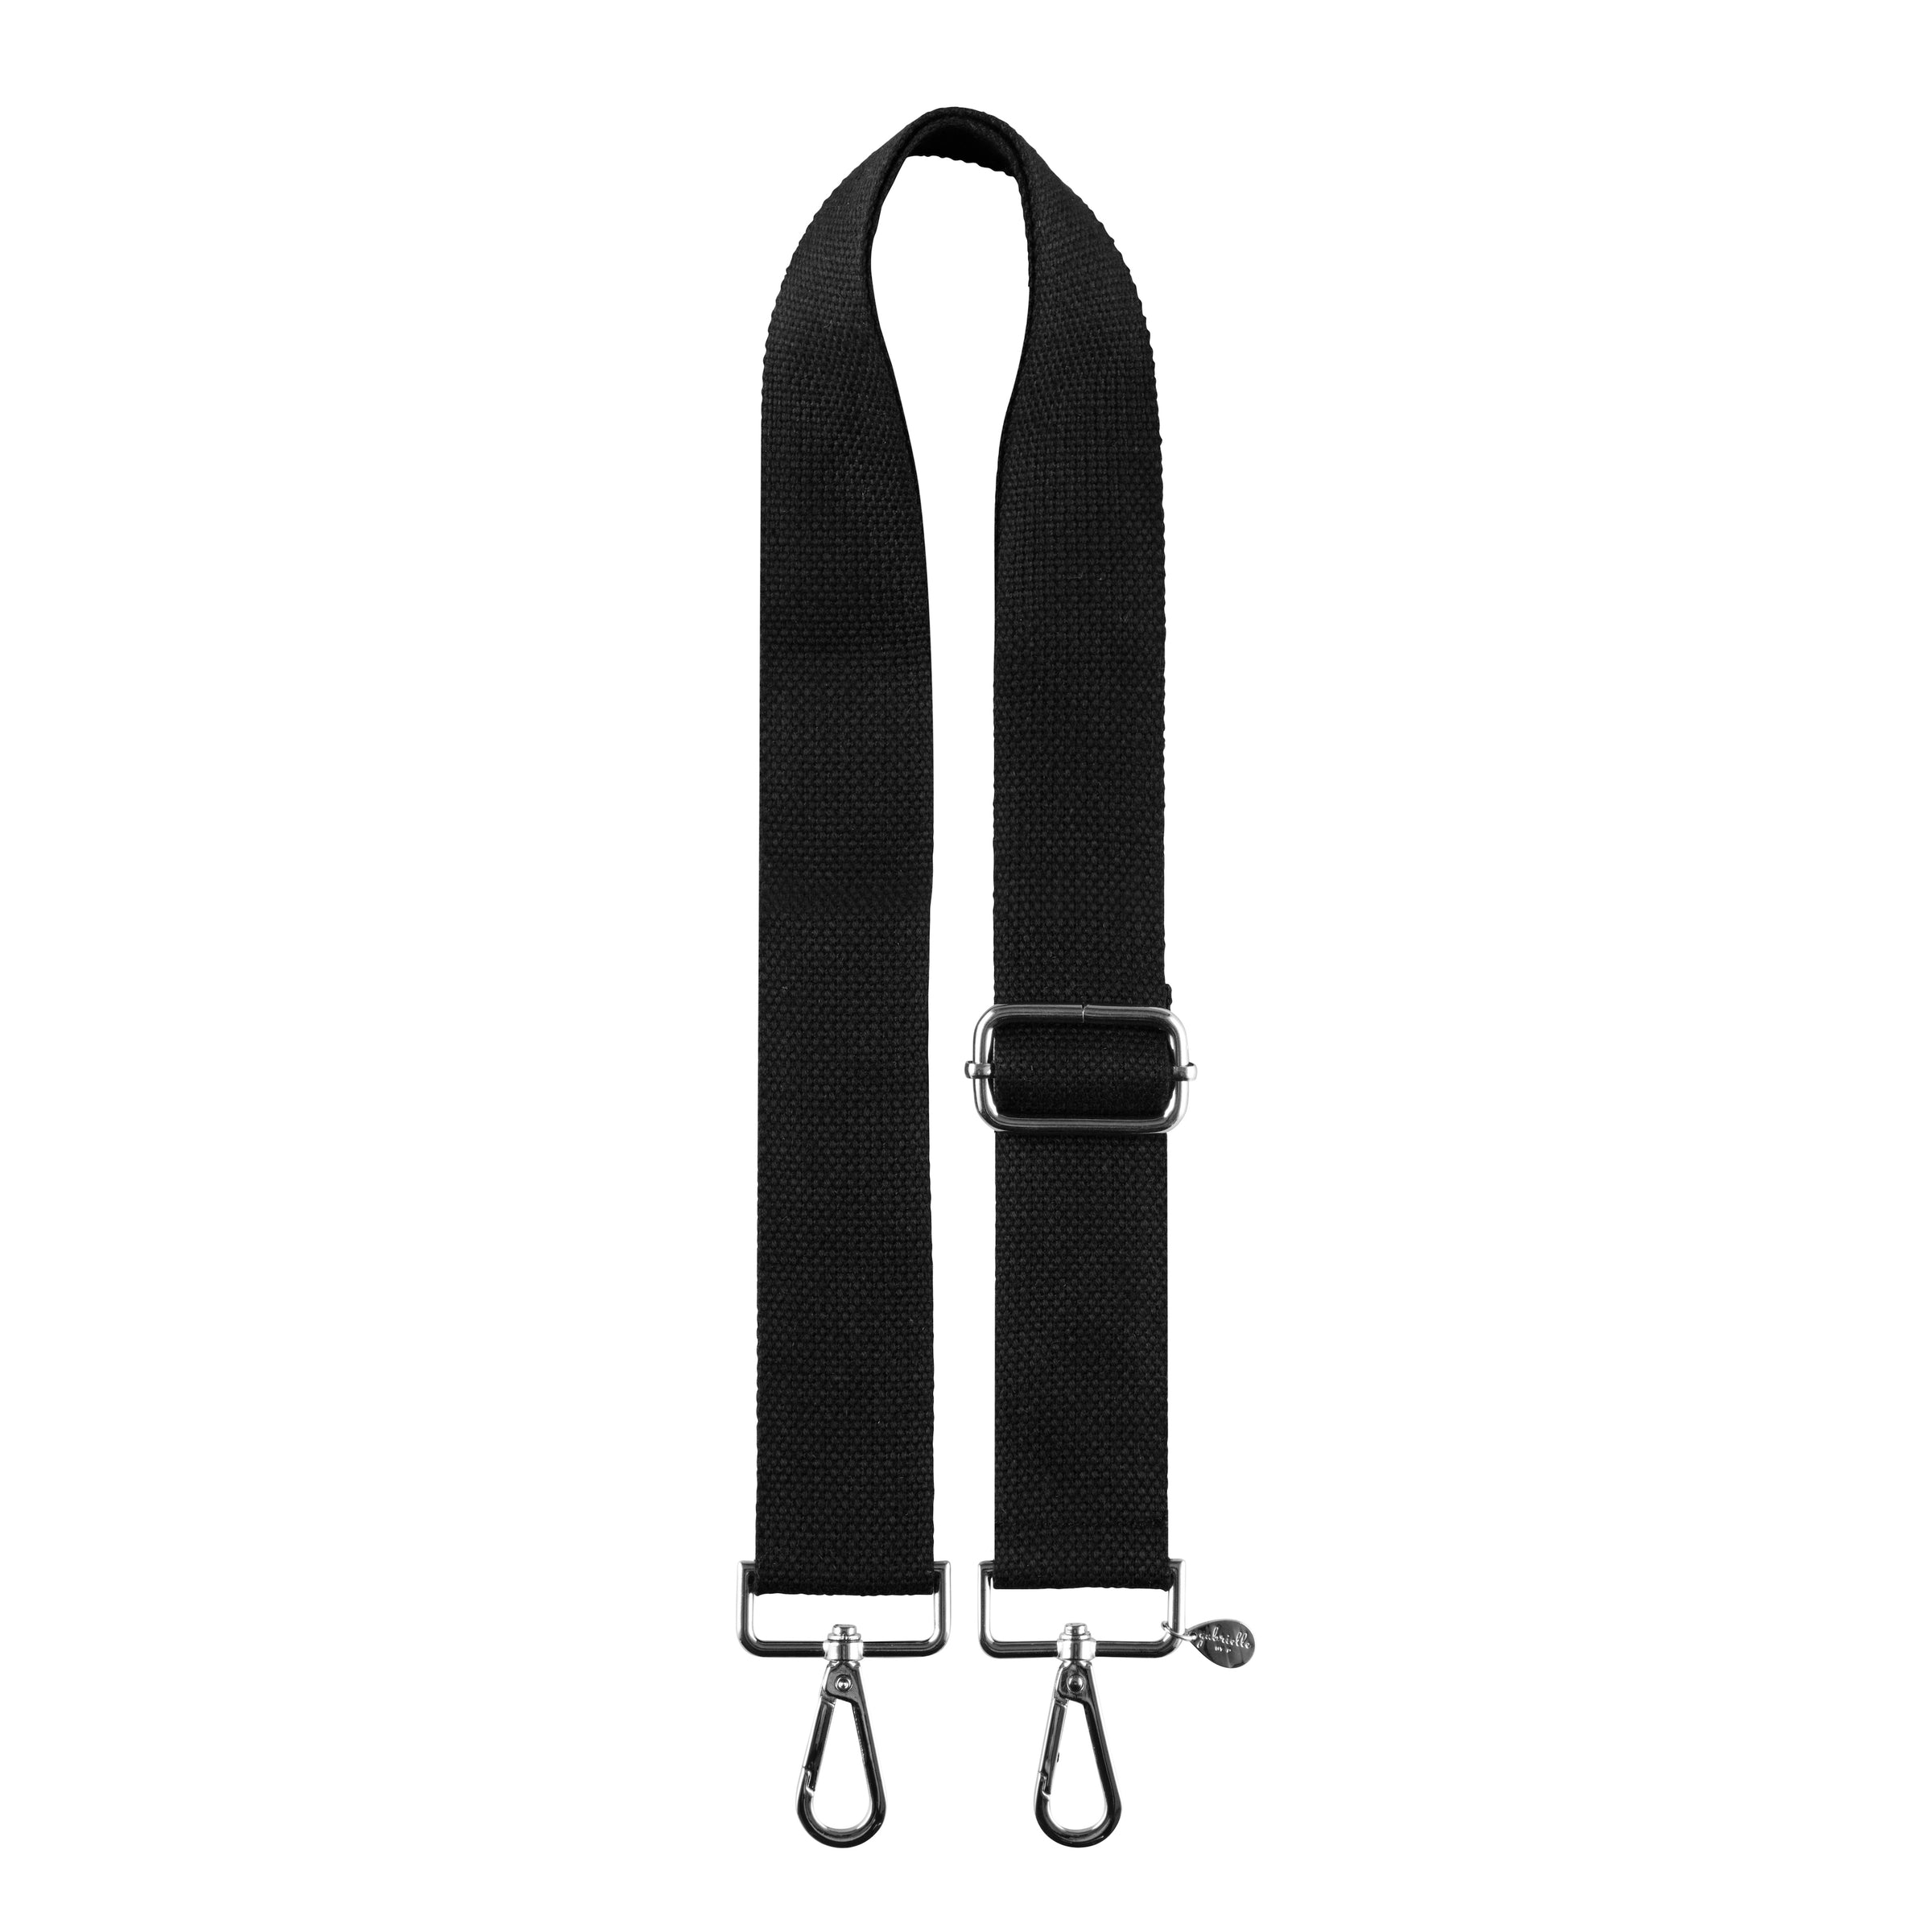 RJK Jewelry. Adjustable Wide Purse Strap Replacement for Crossbodys Handbags & Luggage, Black